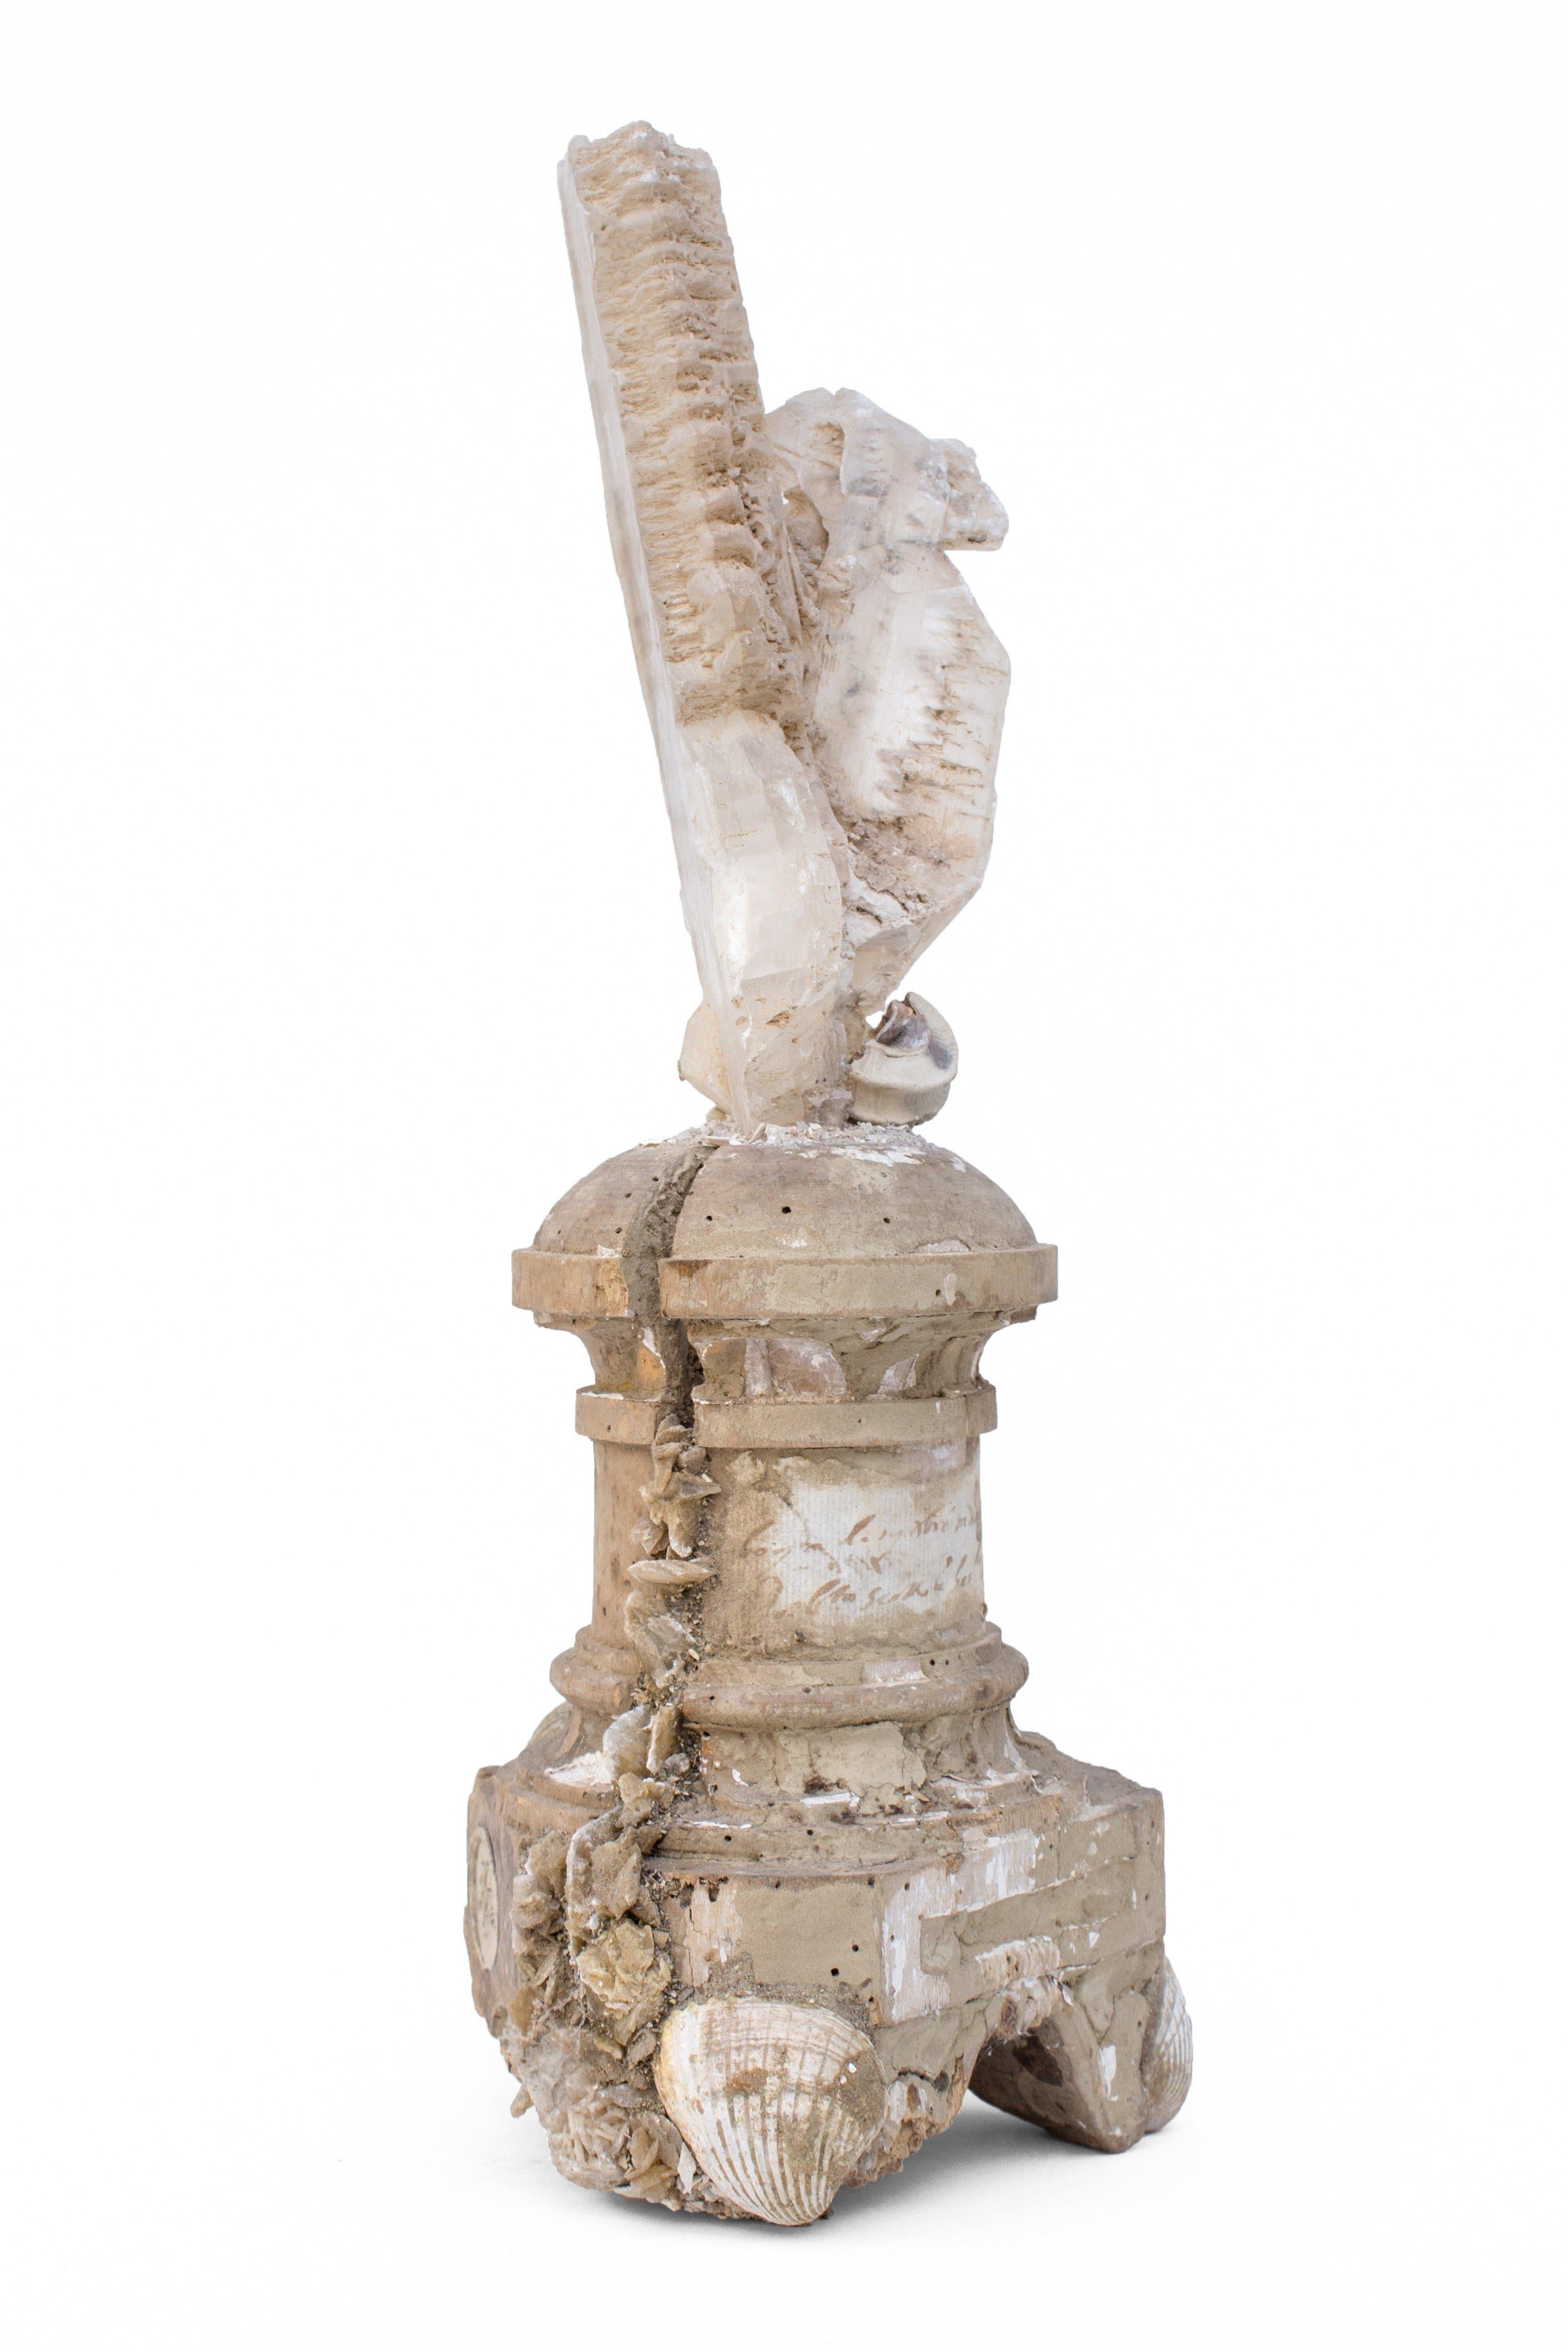 Hand-Carved 17th Century Italian Candlestick with a Selenite Blade Cluster and Fossil Shells